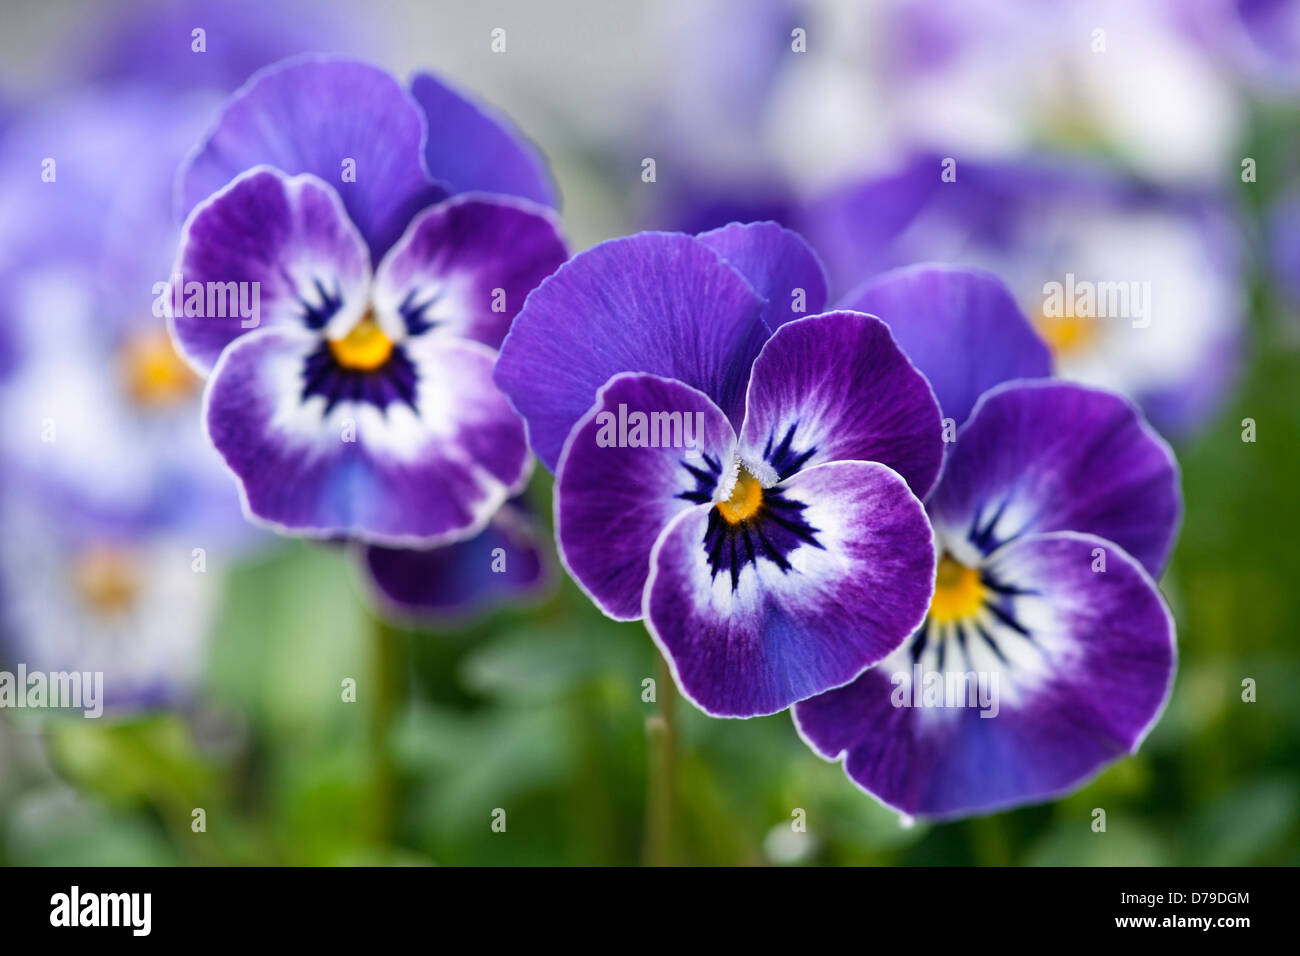 F1 Viola Delft Blue. Three flowers with blue and white petals and yellow at centre. Stock Photo